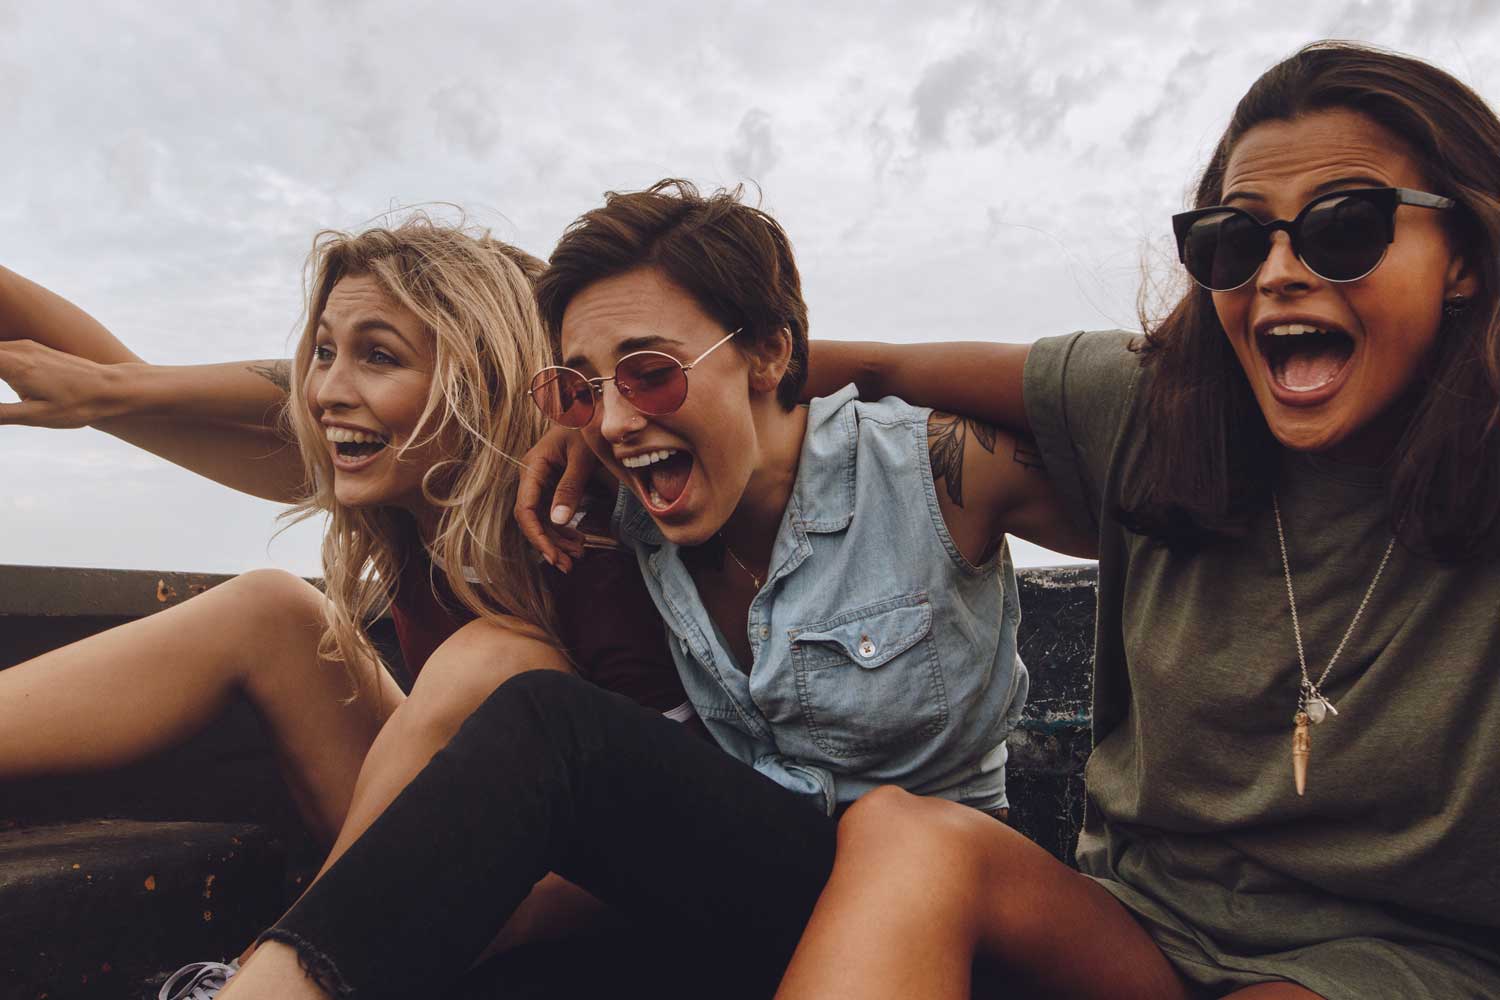 Three best girl friends in a truck bed, laughing together.